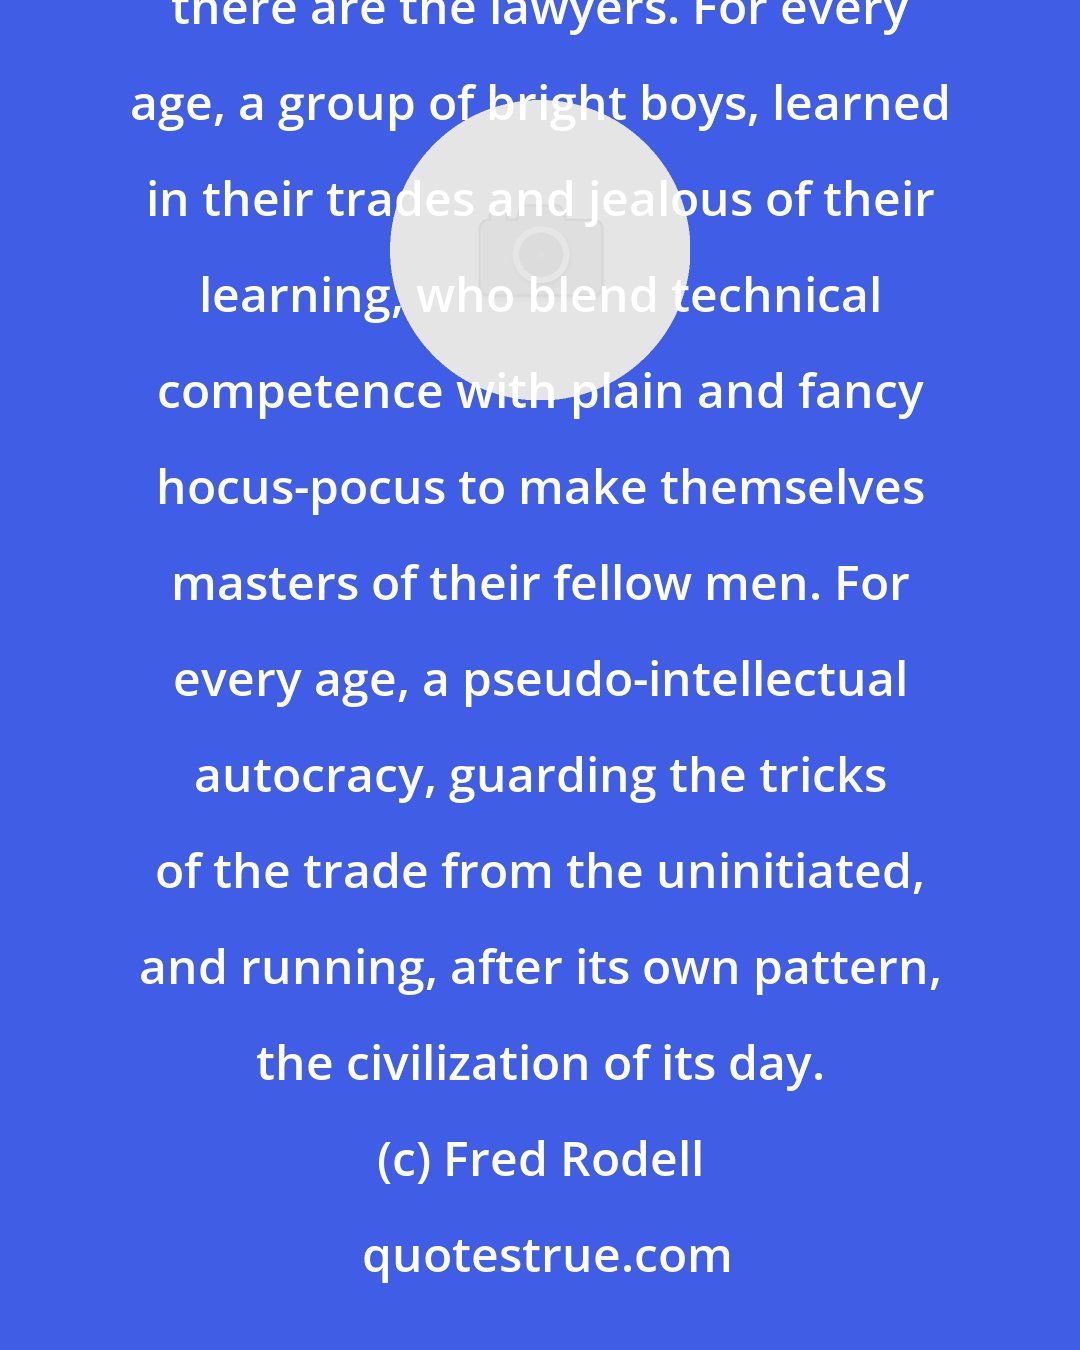 Fred Rodell: In tribal times, there were the medicine men. In the Middle Ages, there were the priests. Today, there are the lawyers. For every age, a group of bright boys, learned in their trades and jealous of their learning, who blend technical competence with plain and fancy hocus-pocus to make themselves masters of their fellow men. For every age, a pseudo-intellectual autocracy, guarding the tricks of the trade from the uninitiated, and running, after its own pattern, the civilization of its day.